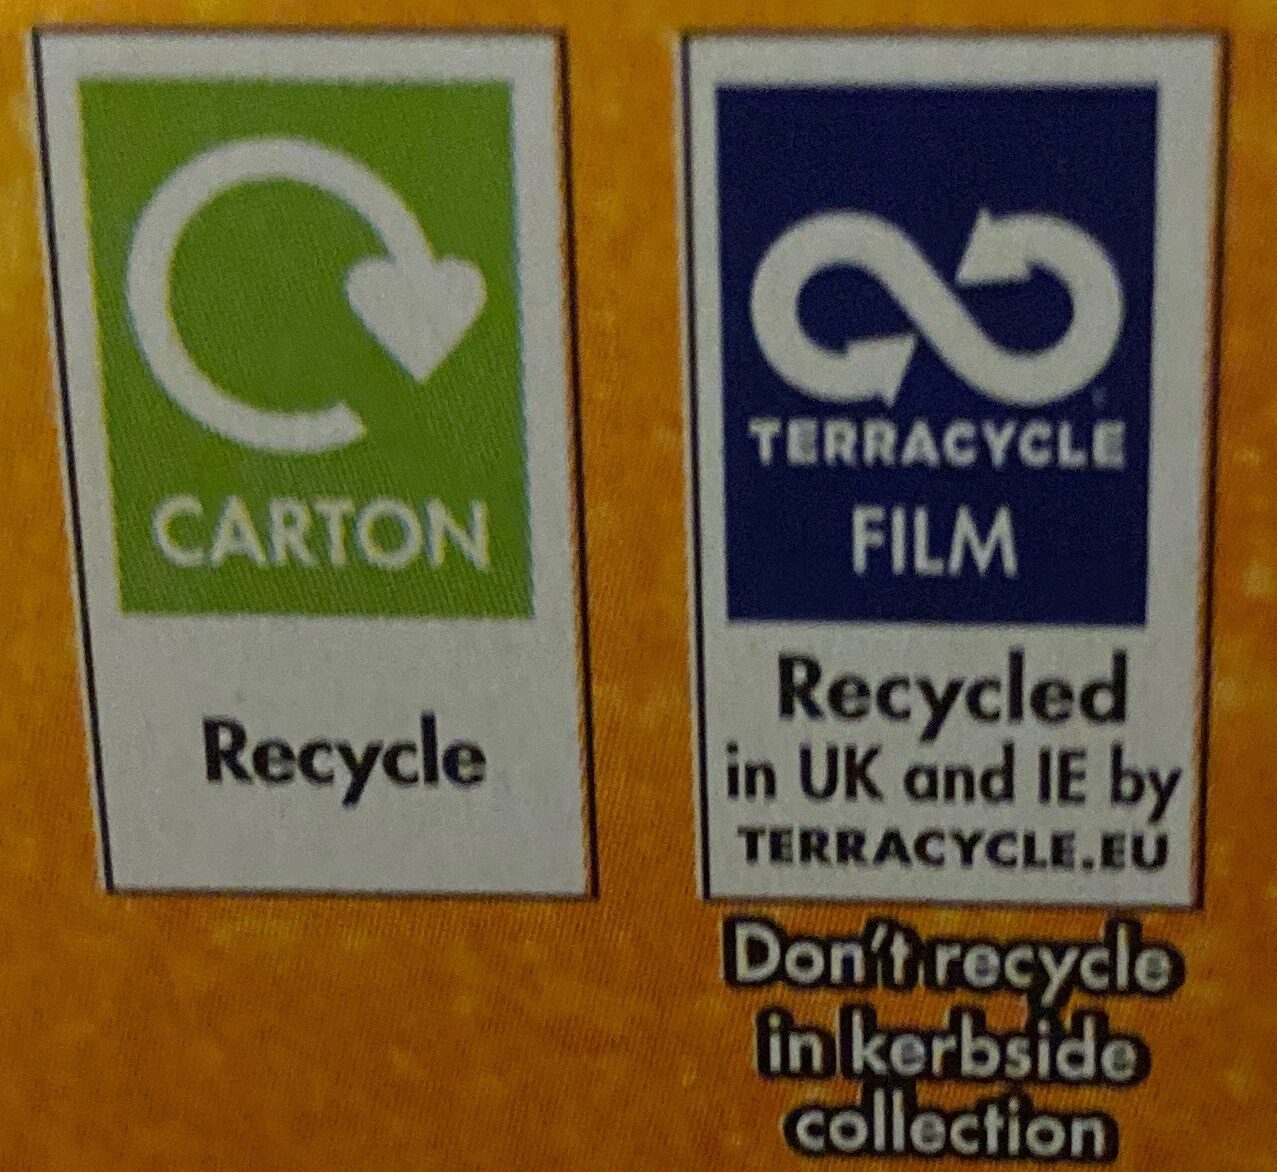 Jaffa Cakes - Recycling instructions and/or packaging information